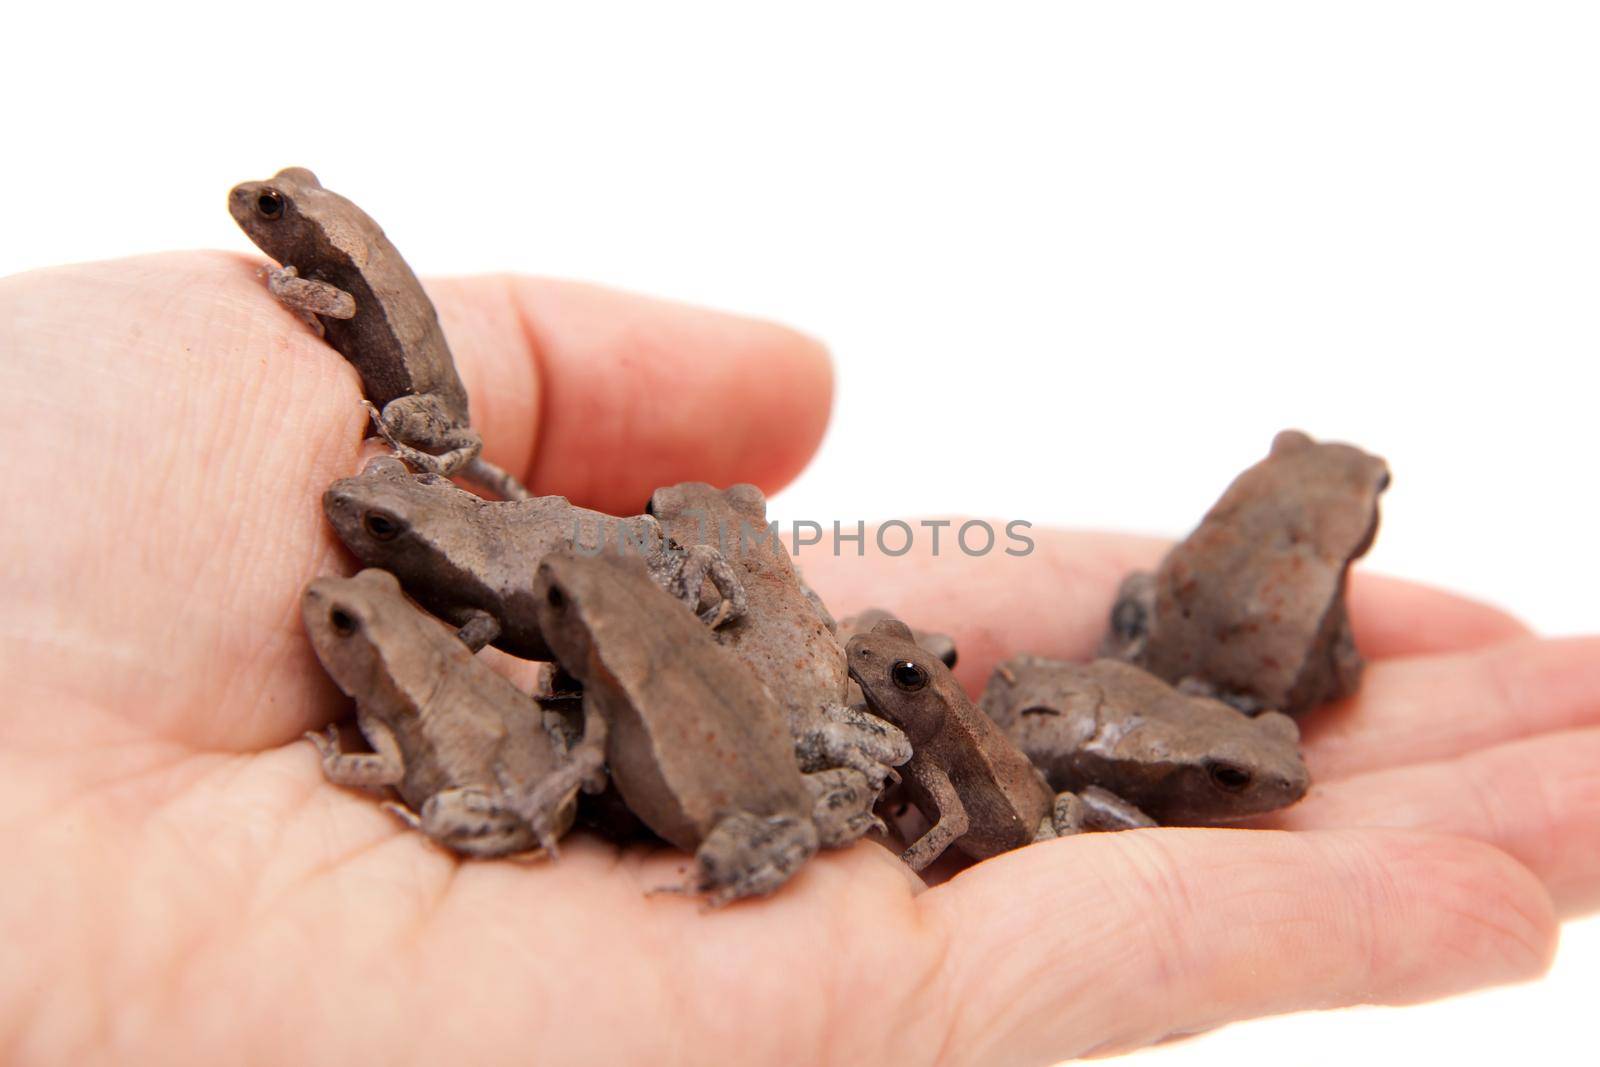 Few smooth-sided toads, Rhaebo guttata, isolated on white background